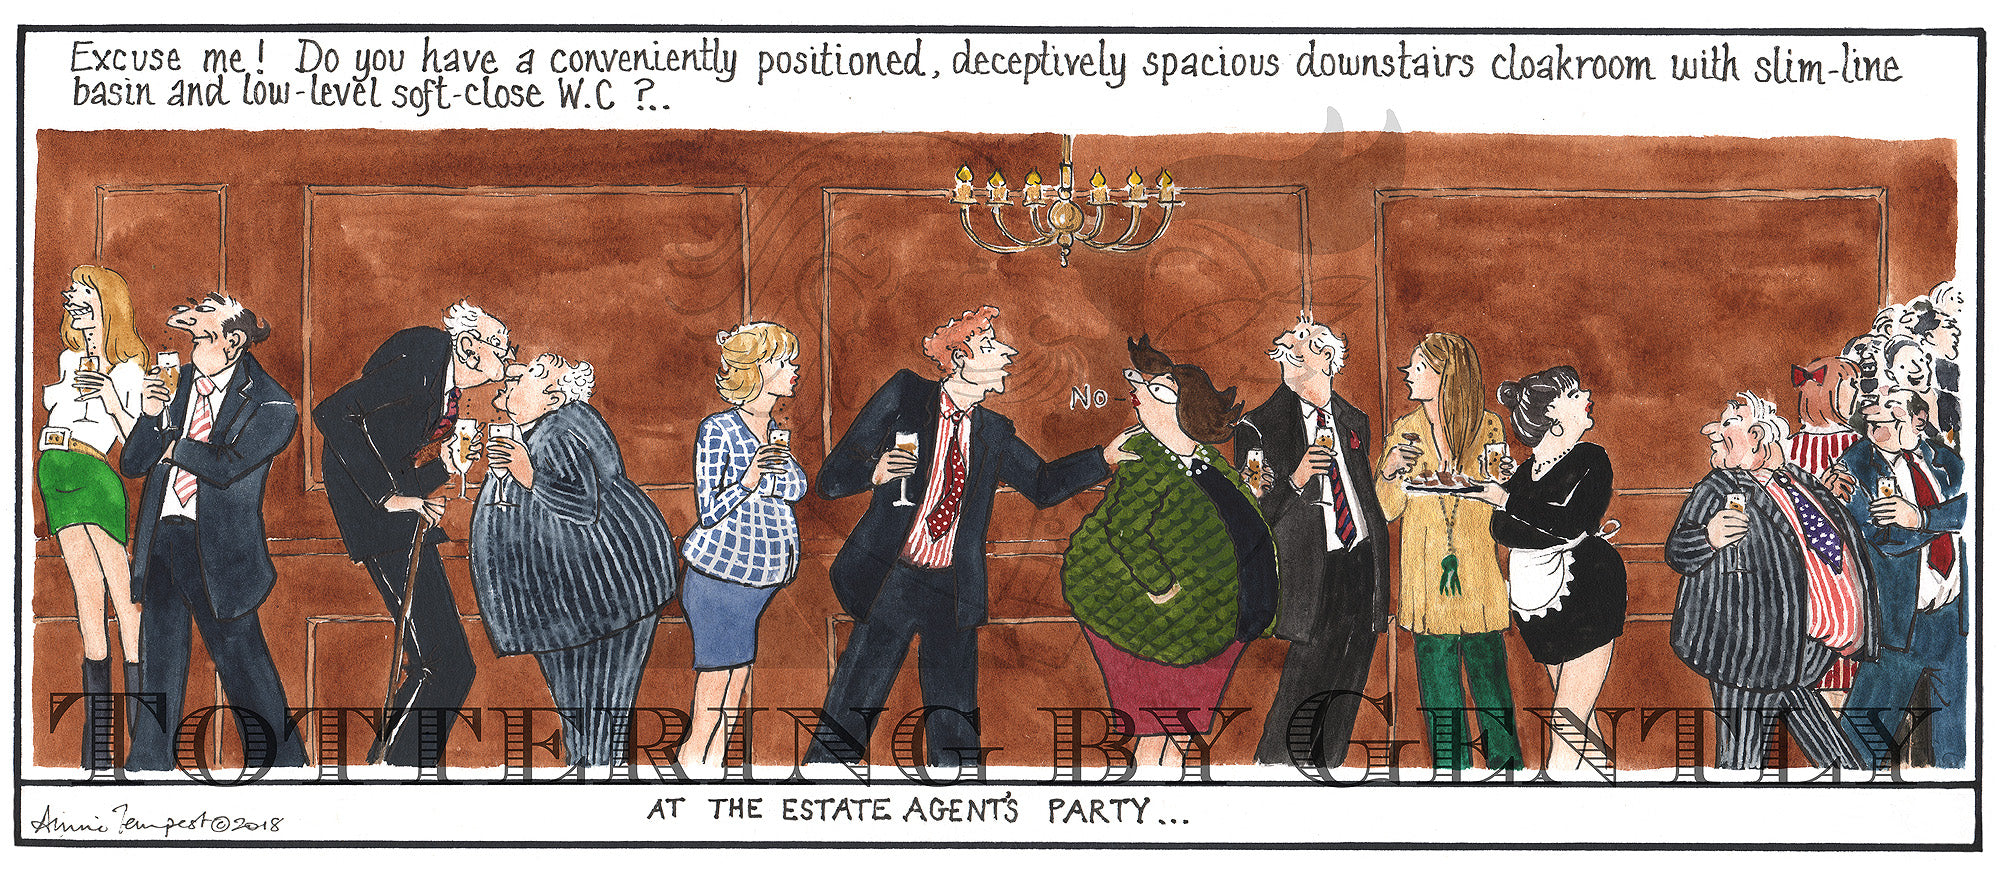 At the Estate Agents Party... (CL1285)